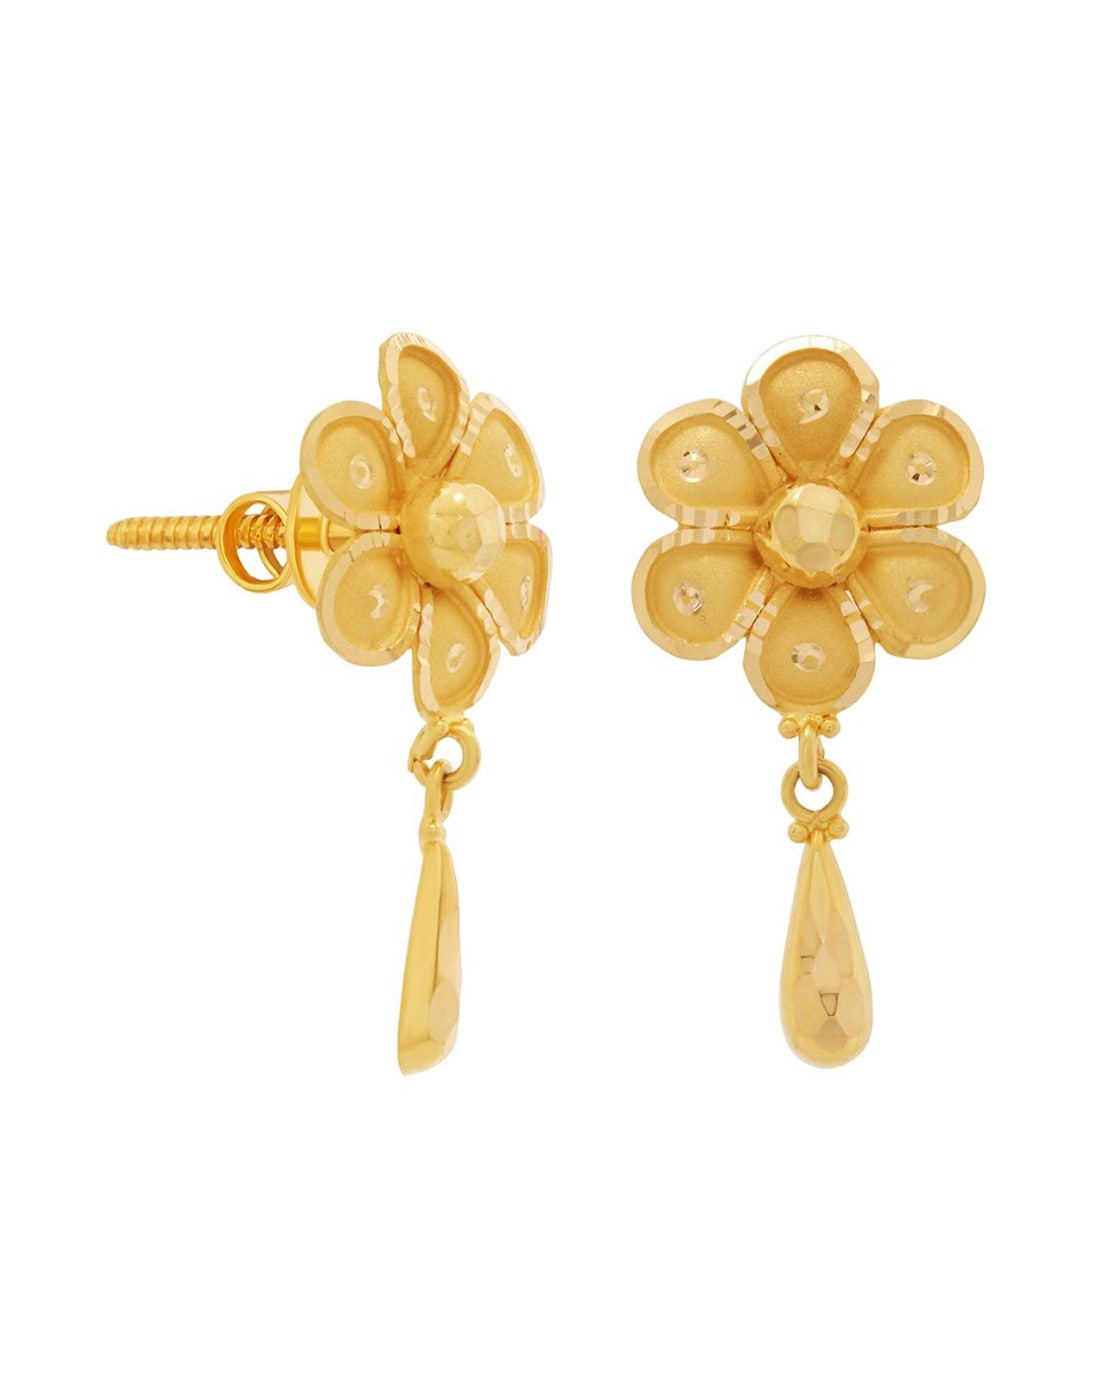 Peacock design luxury of our premium quality earrings – Look Ethnic